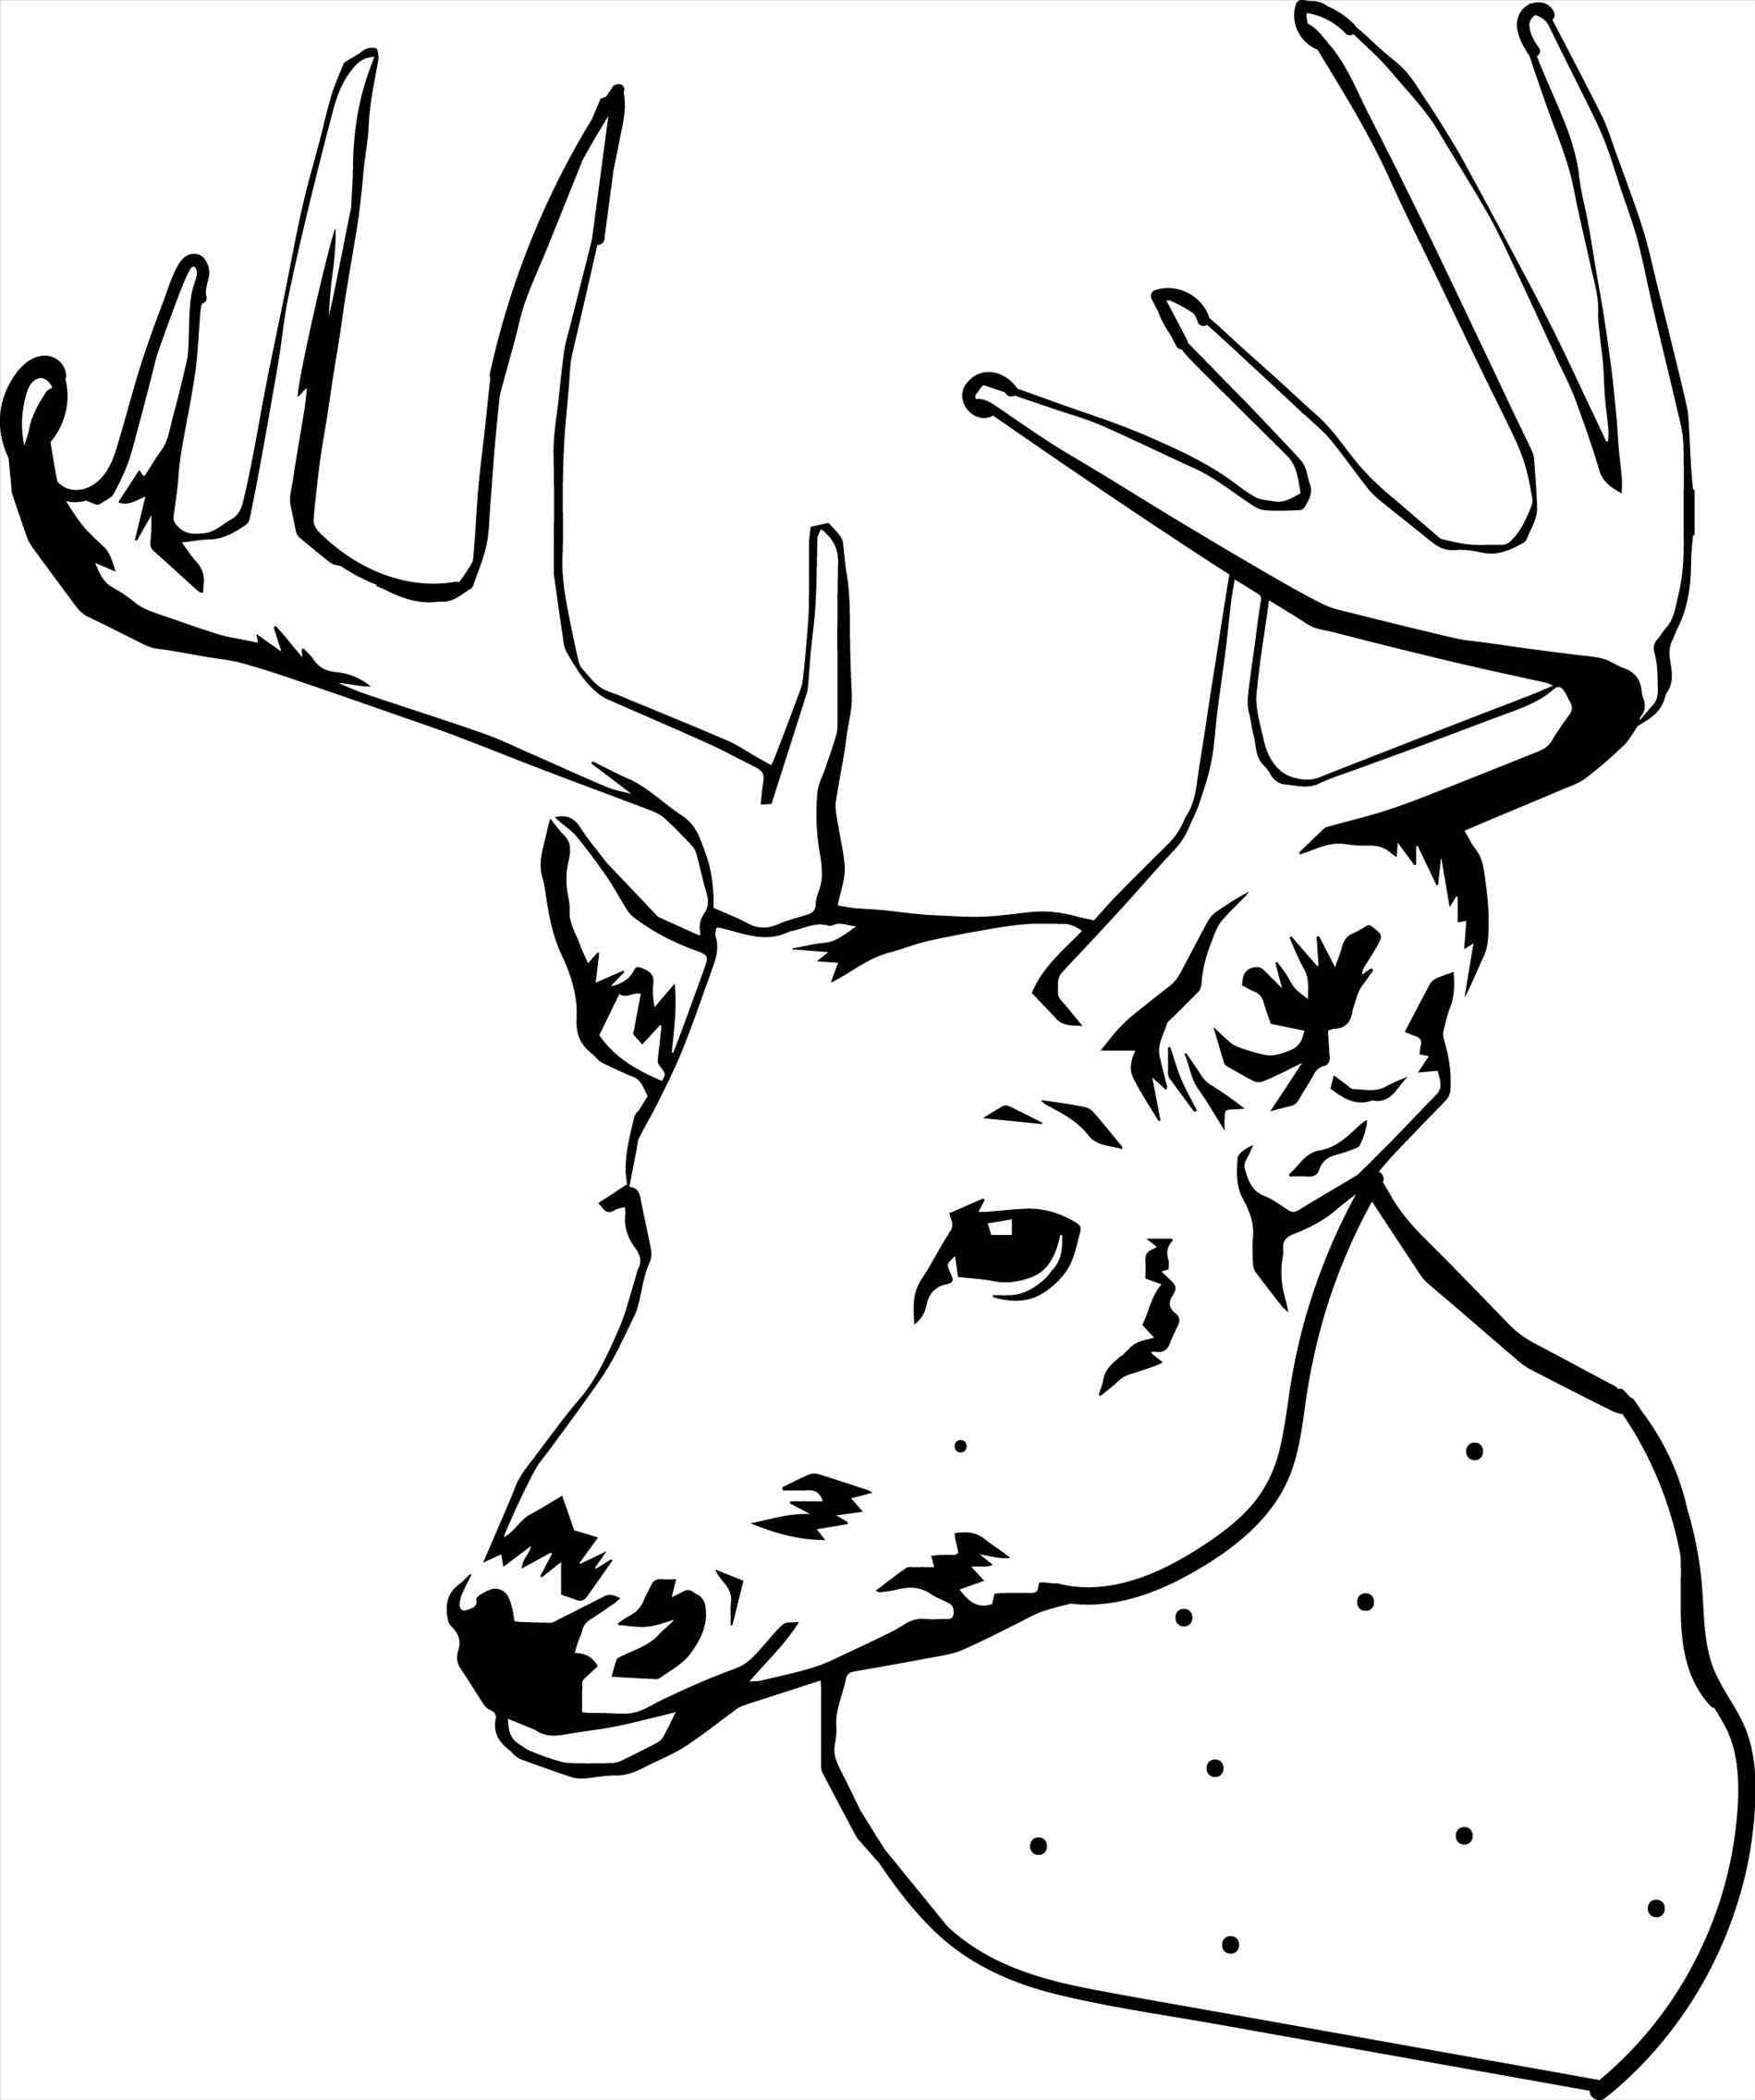 Deer Coloring Pages Coloring Design Deer Coloring Pages Free Download Best On